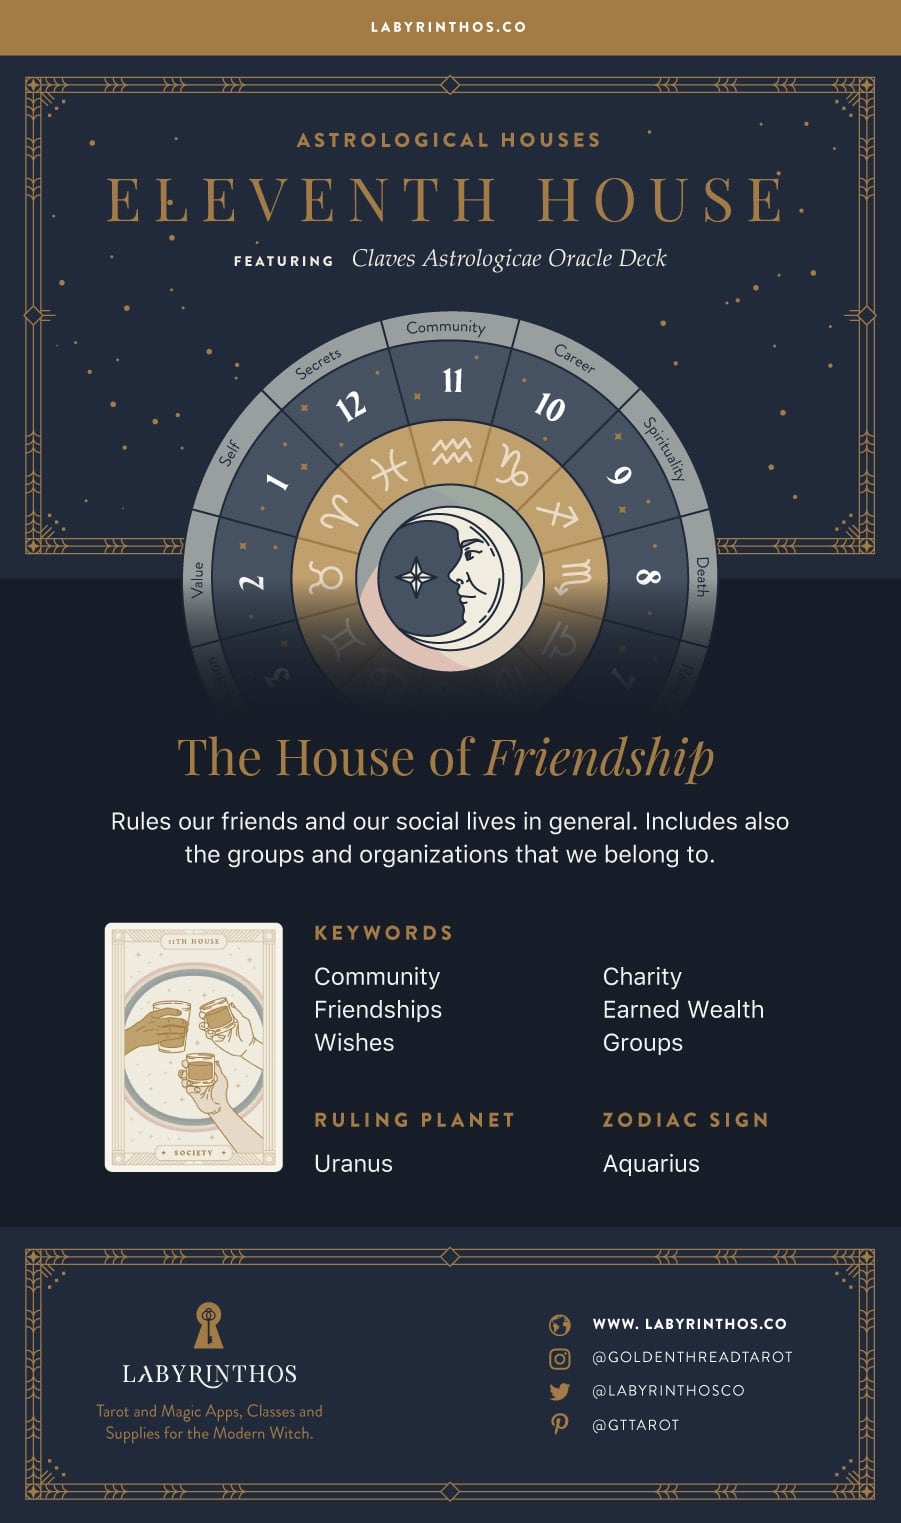 The Eleventh House: The House of Friendship - the 12 Houses of Astrology Infographic